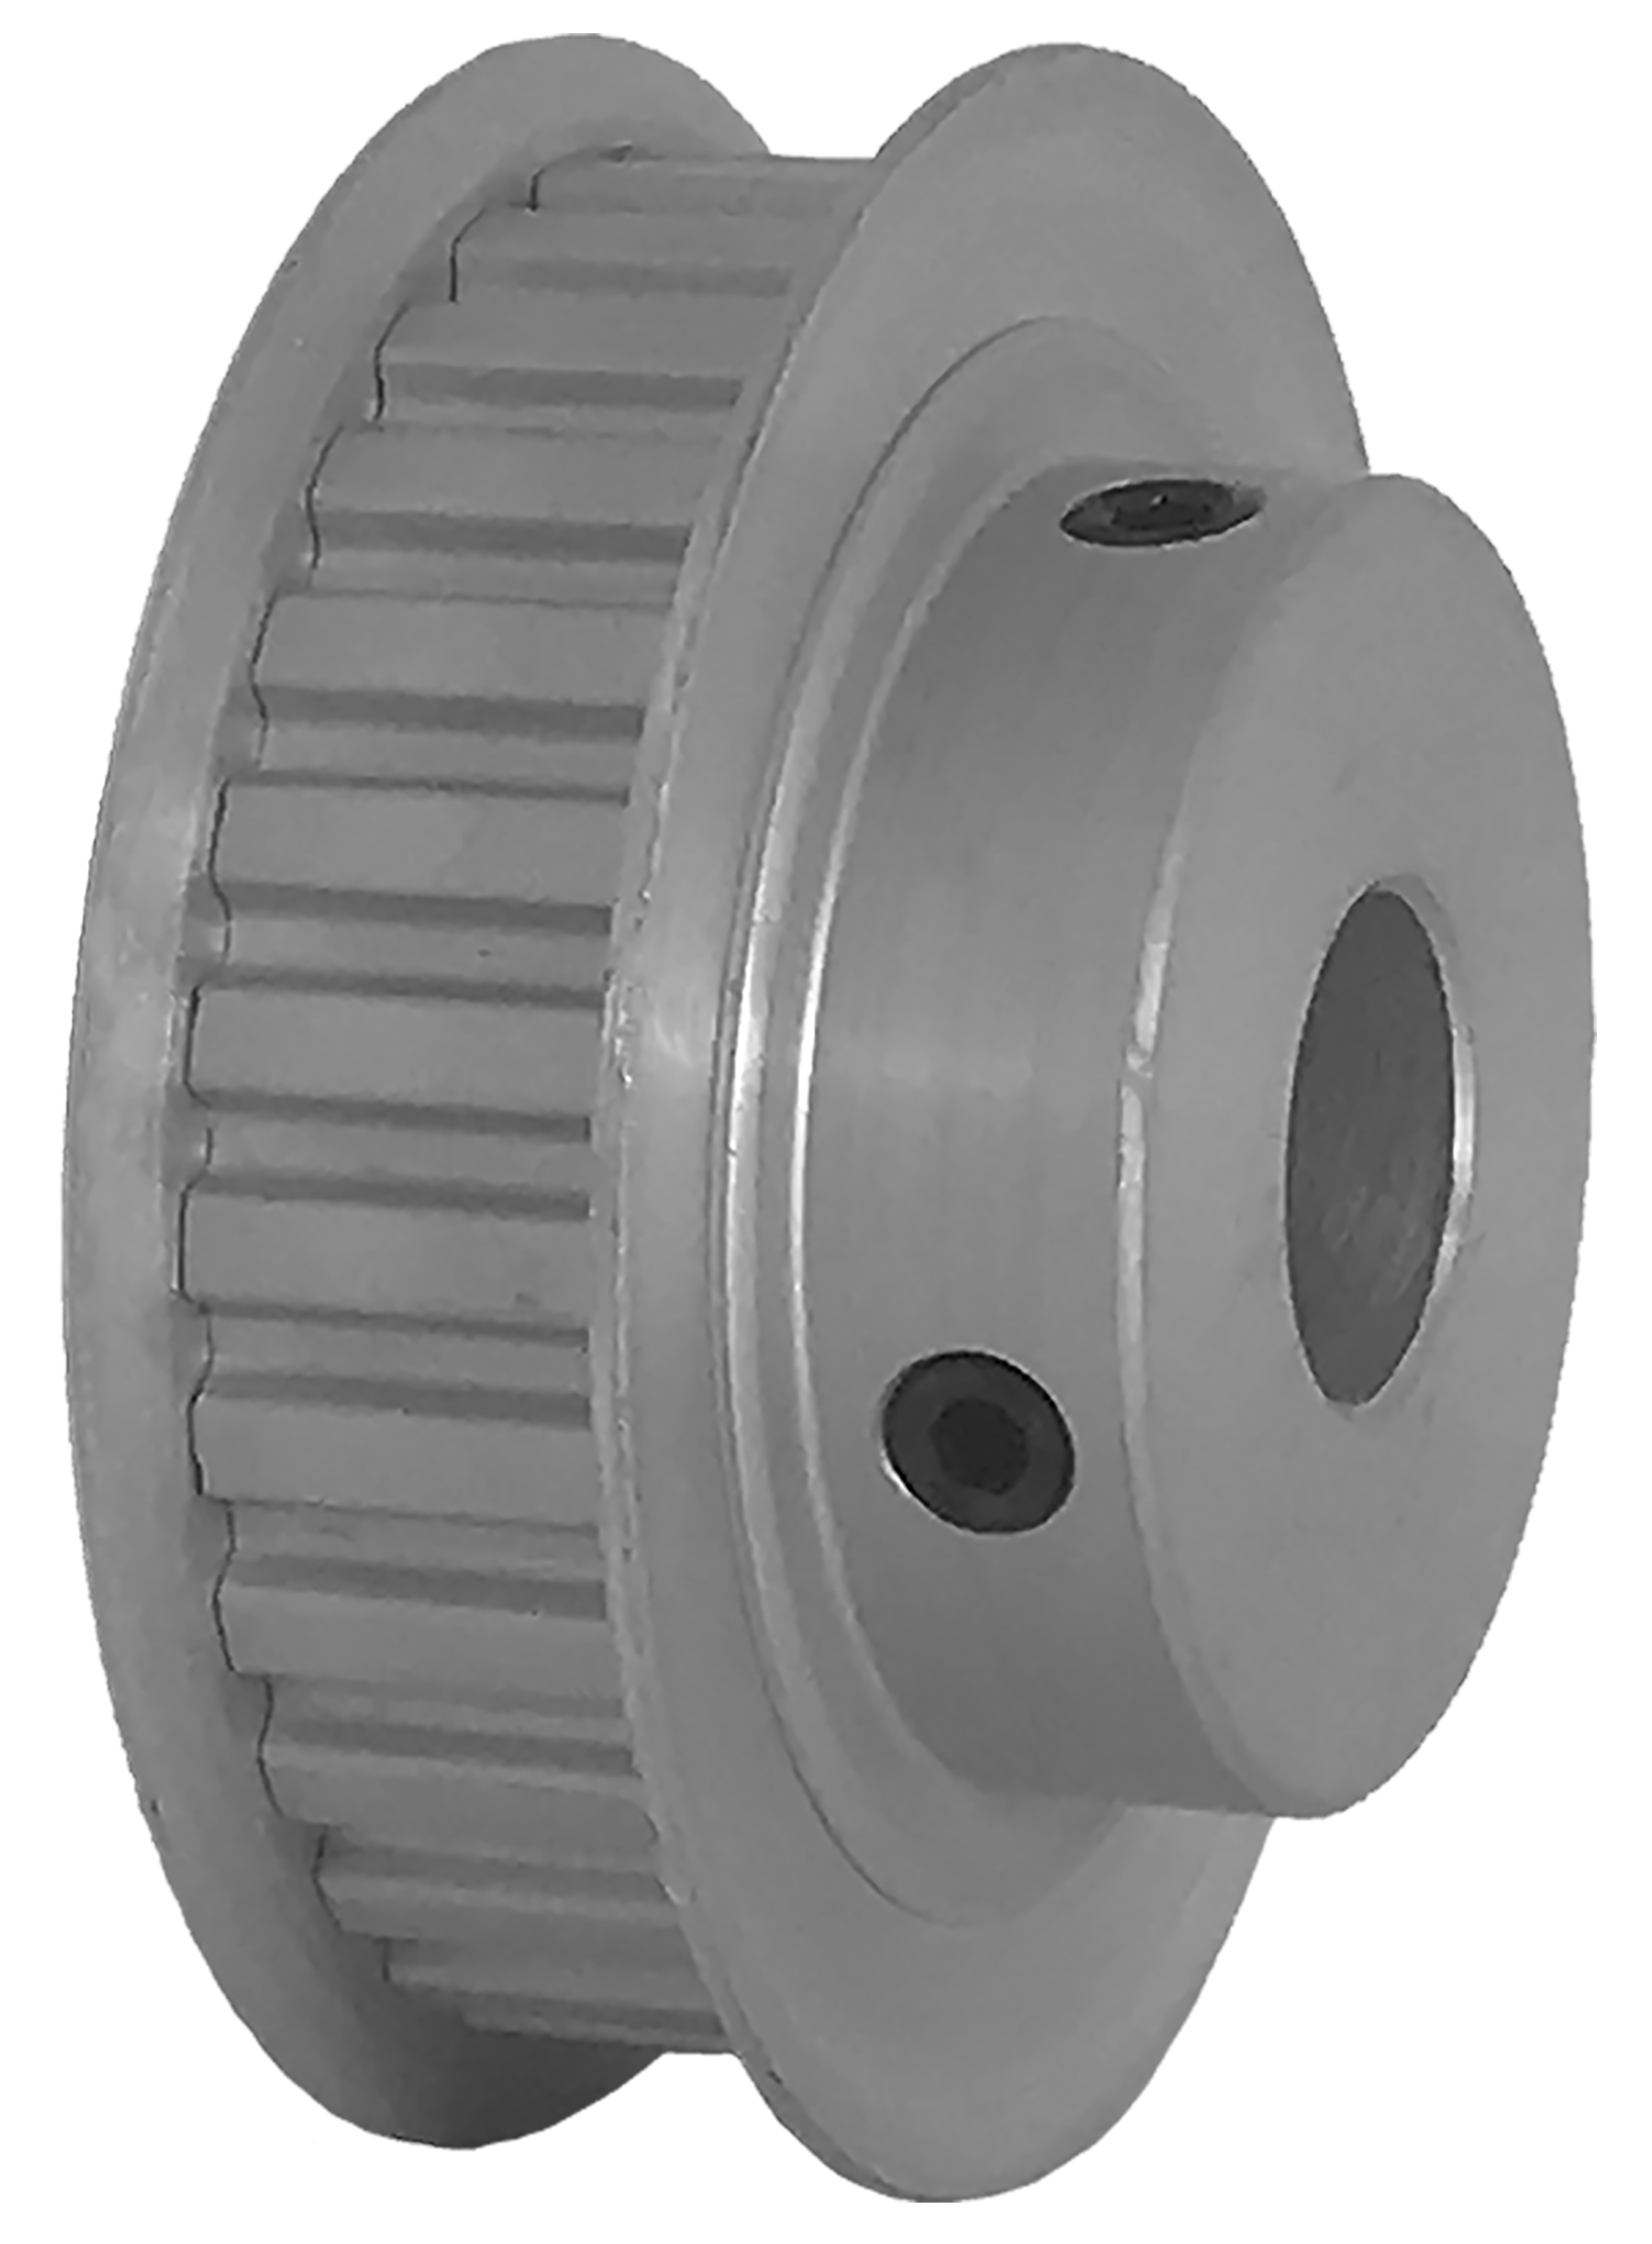 30XL037-6FA6 - Aluminum Imperial Pitch Pulleys